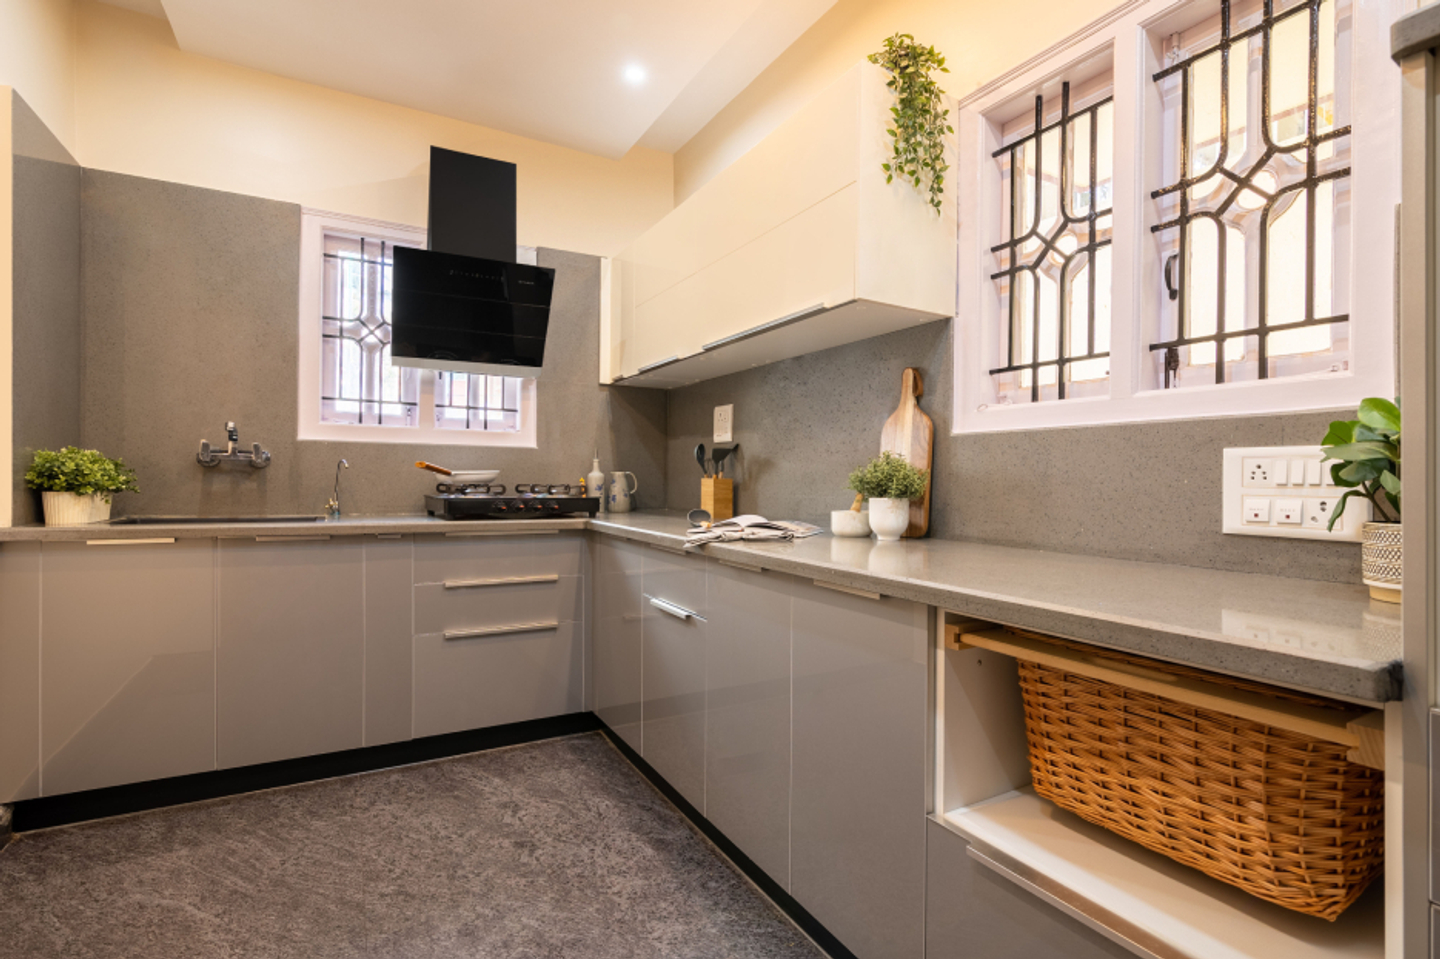 Classic L-Shaped Modular Kitchen Design With Grey Countertop And Storage Cabinets